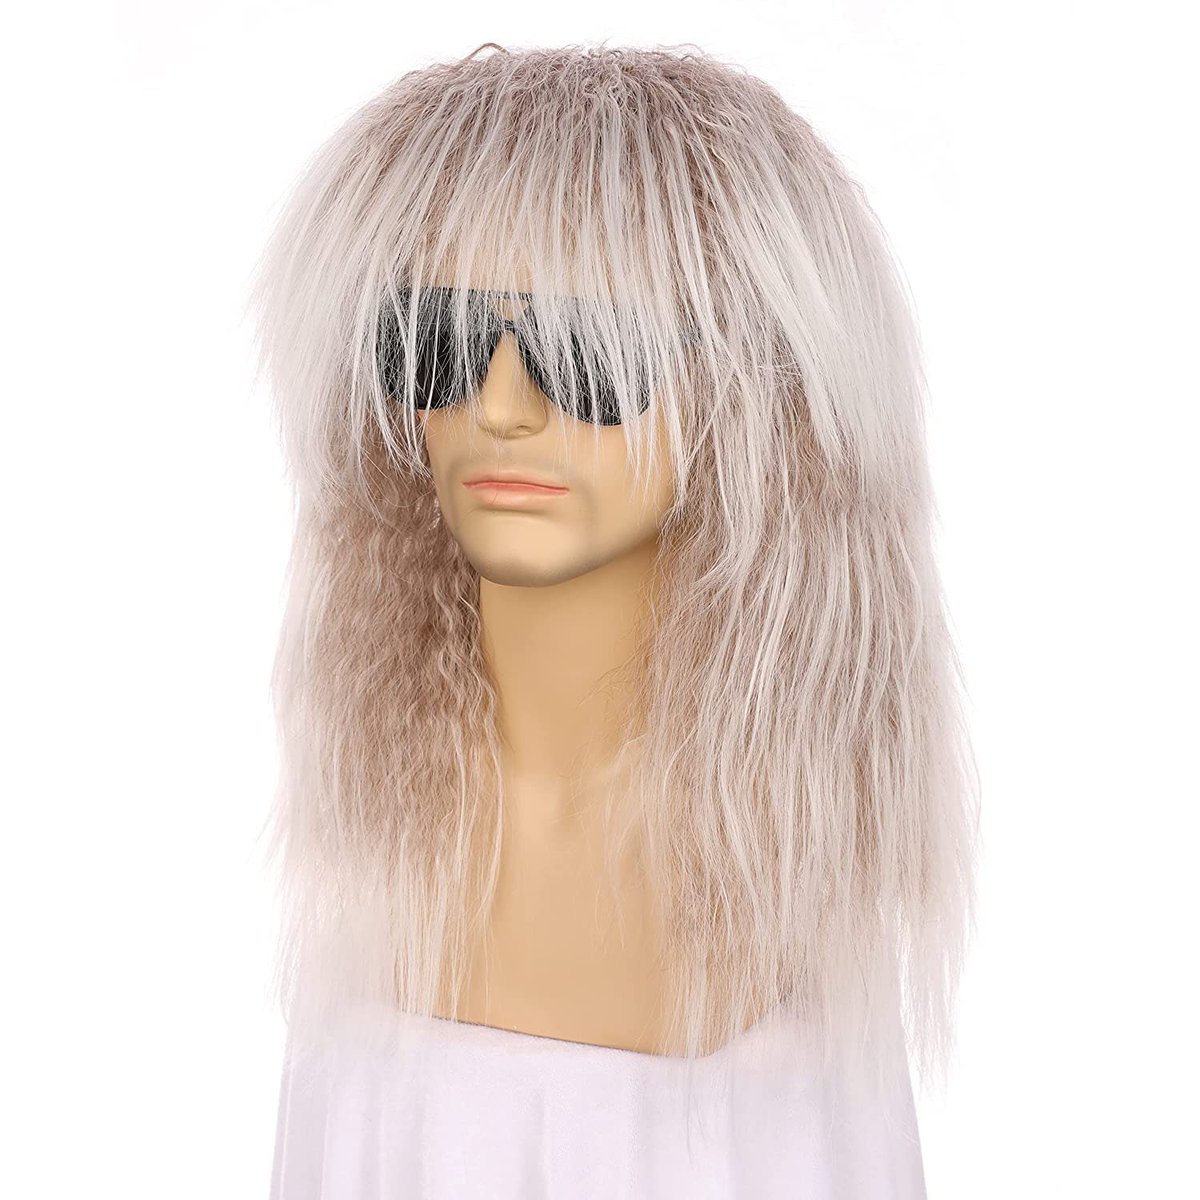 Excited to share the latest addition to my #etsy shop: Men's Long Curly Synthetic Wavy Hair 80s Punk Rock Wig Cosplay Wigs (Silver White) etsy.me/3gUOkQQ #silver #white #wigs #synthetichair #curly #adultsize #cosplaywigs #shortcurlywig #colonialjudgewig